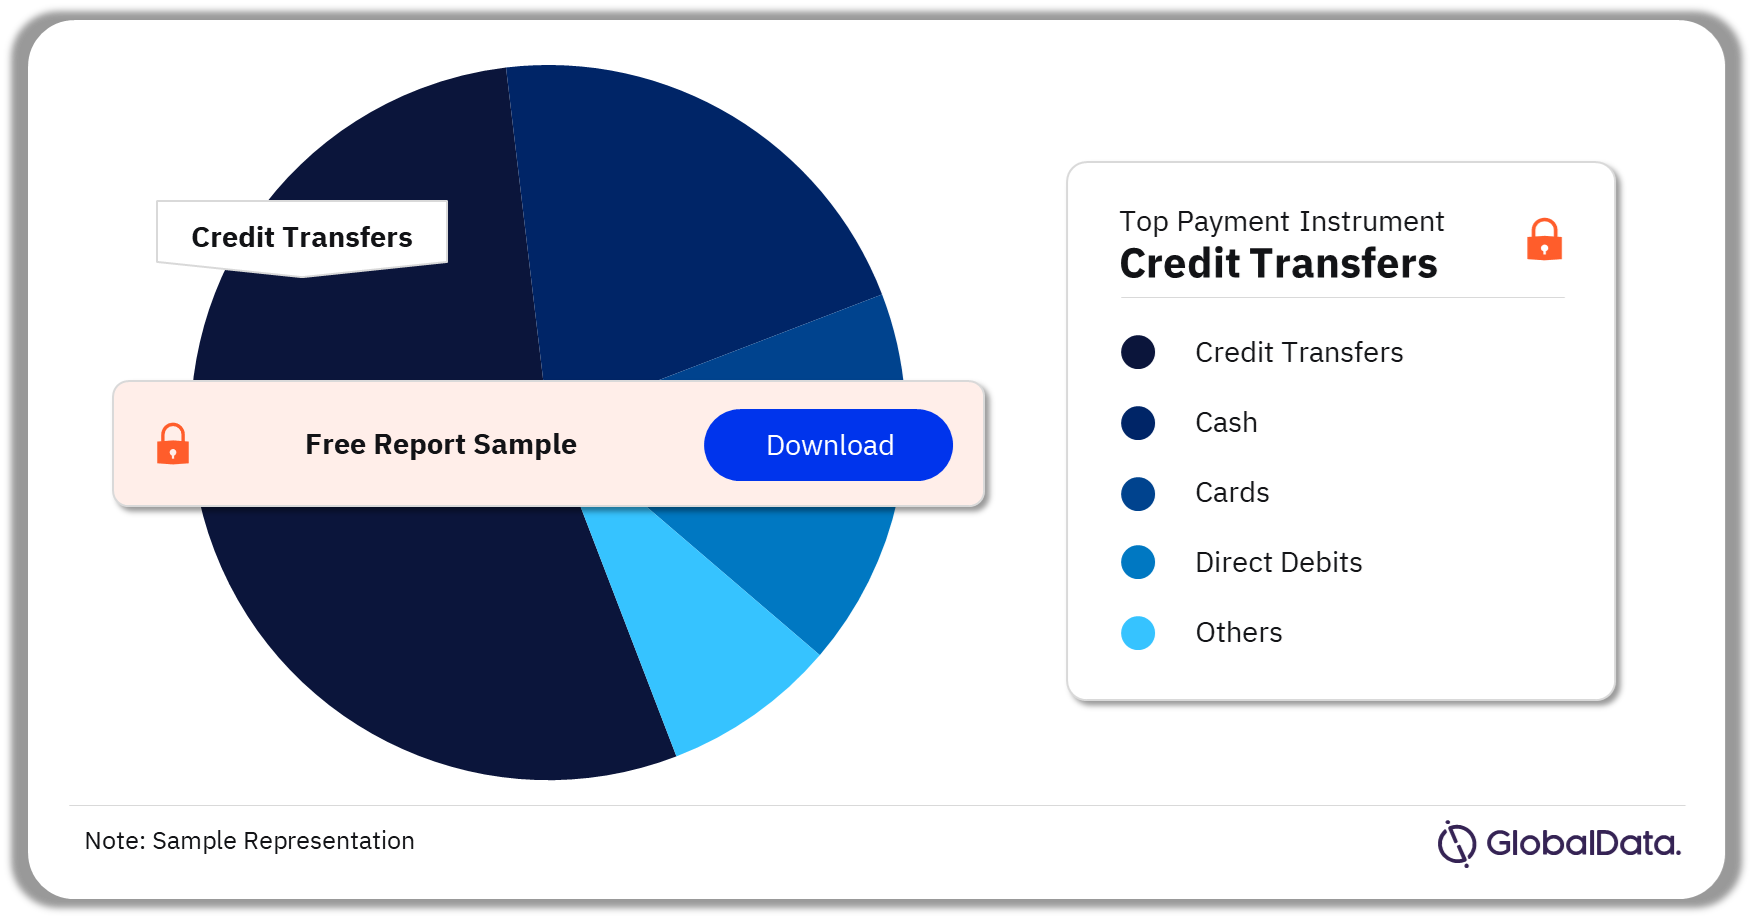 Malaysia Cards and Payments Market Analysis by Payment Instruments, 2023 (%)